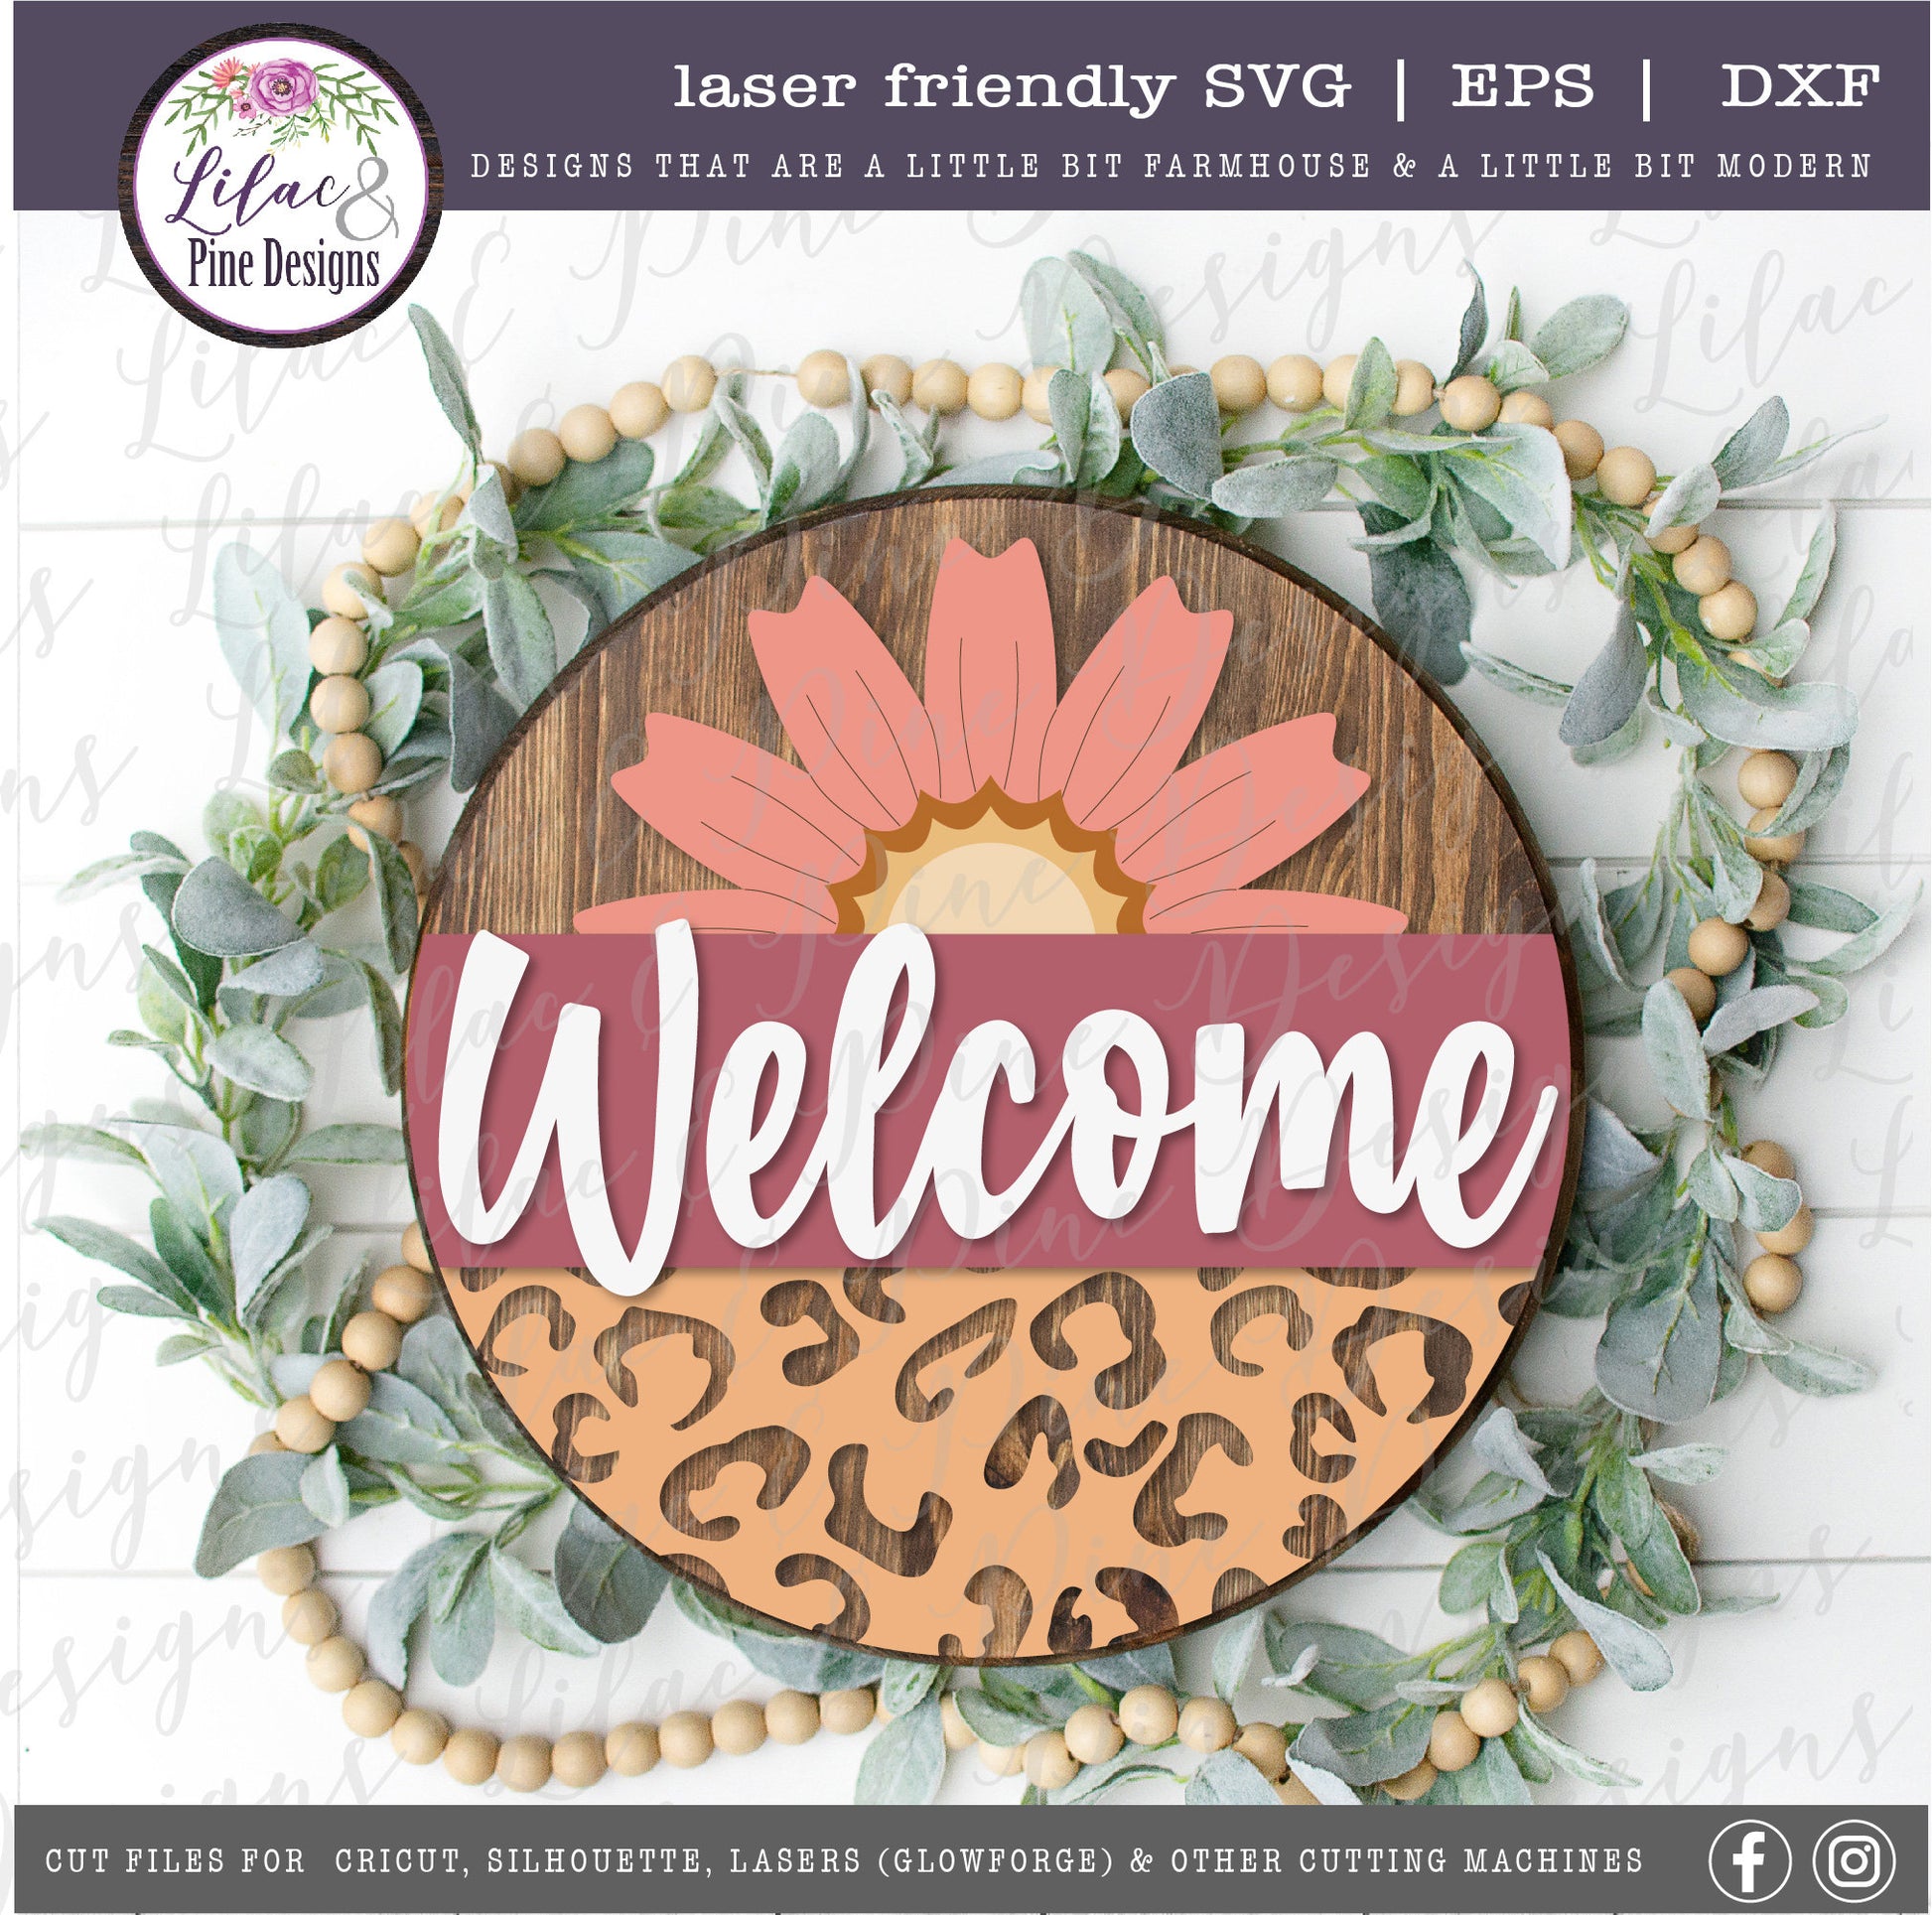 leopard print daisy round welcome sign, front porch decor SVG, floral welcome SVG, leopard print home decor, Glowforge Svg, laser cut file